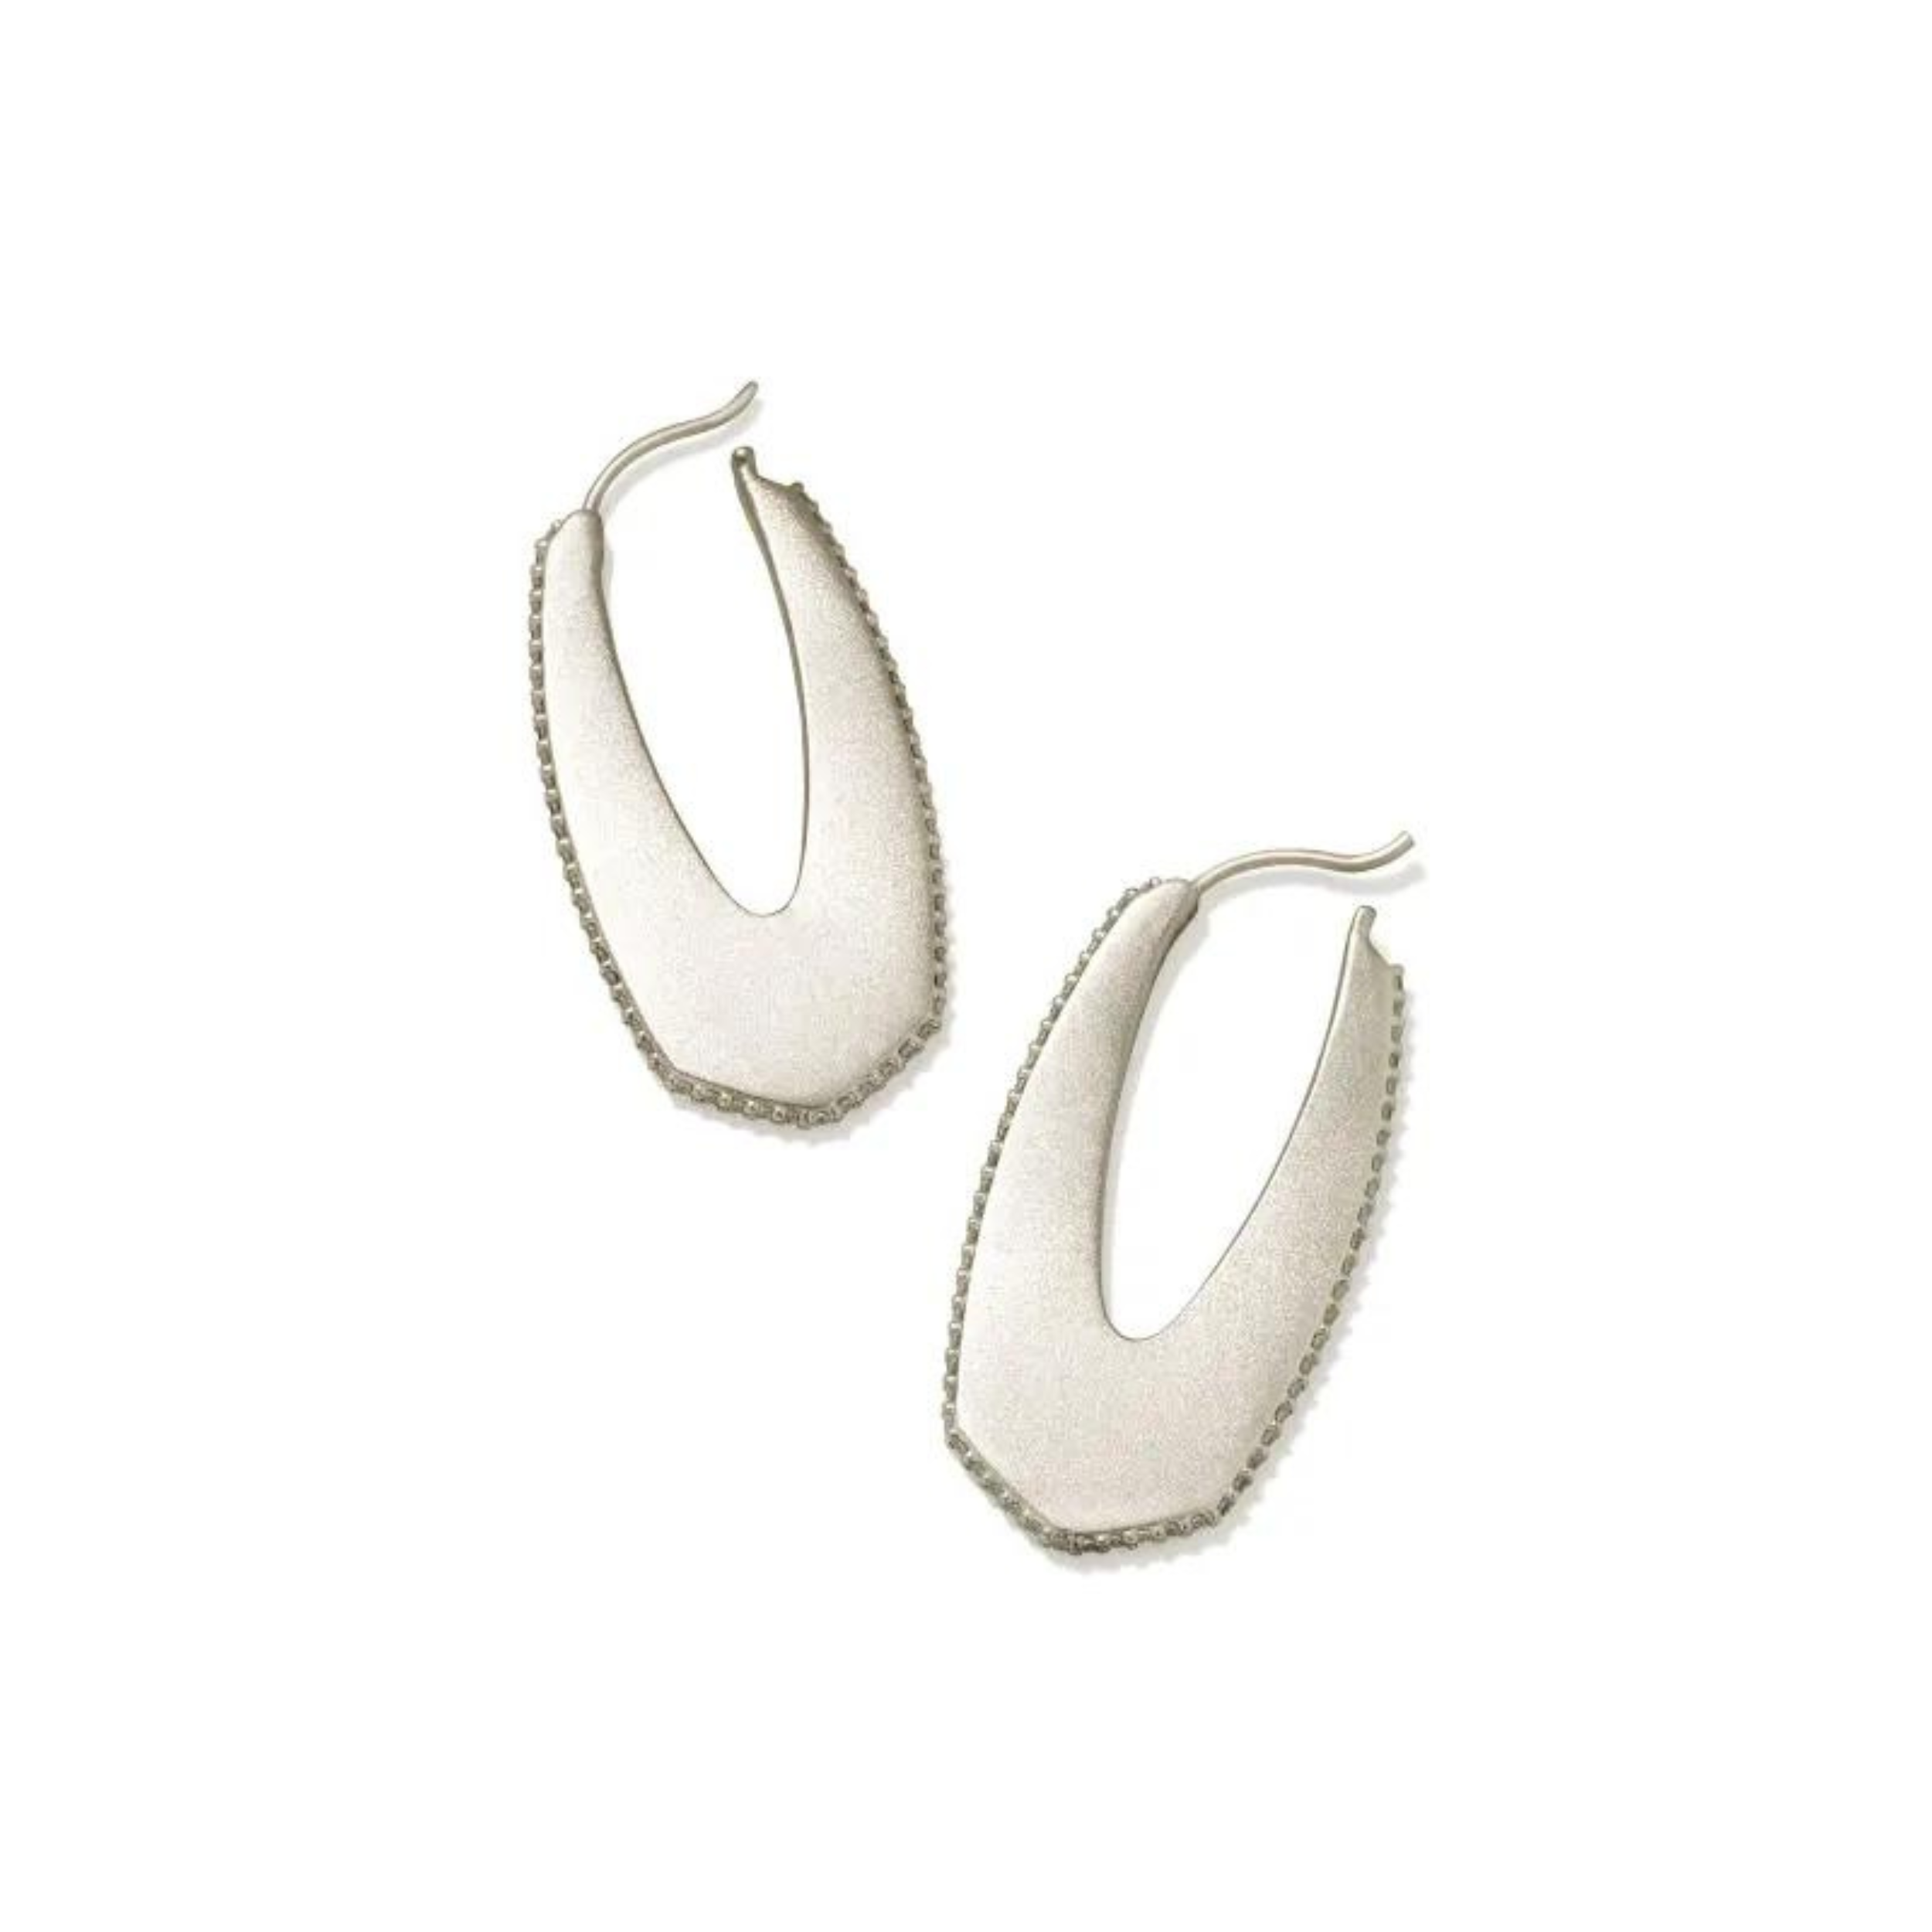 SIlver hoop earrings with white crystals, pictured on a white background.